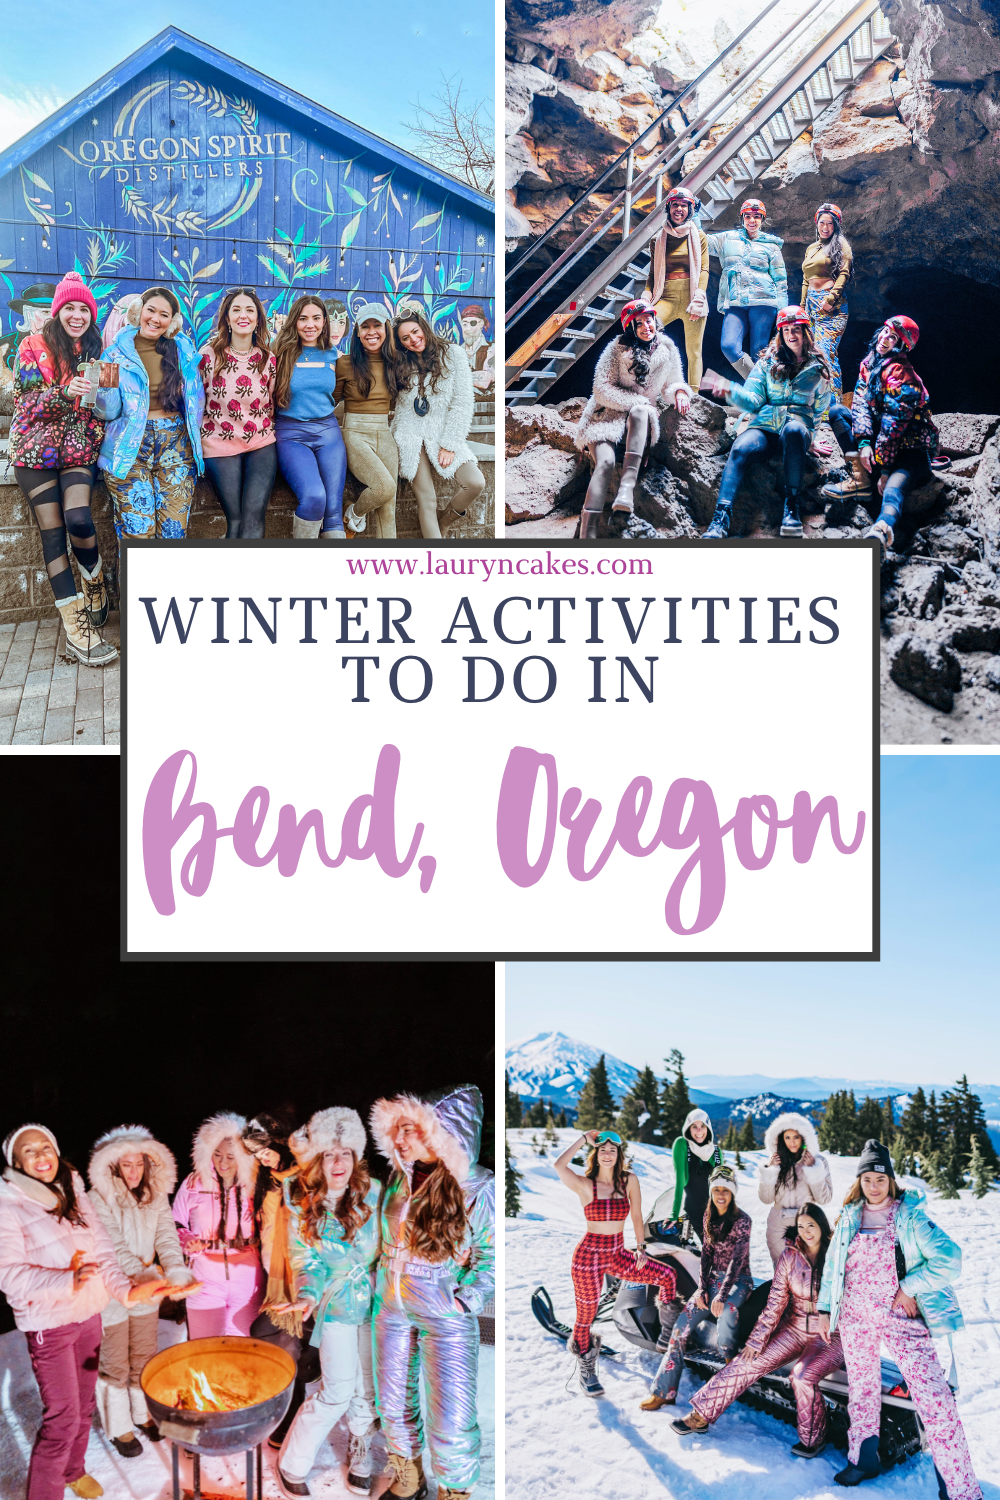 four image collage of a group of 6 travel bloggers . Text overlay says, "winter activities to do in bend, oregon"